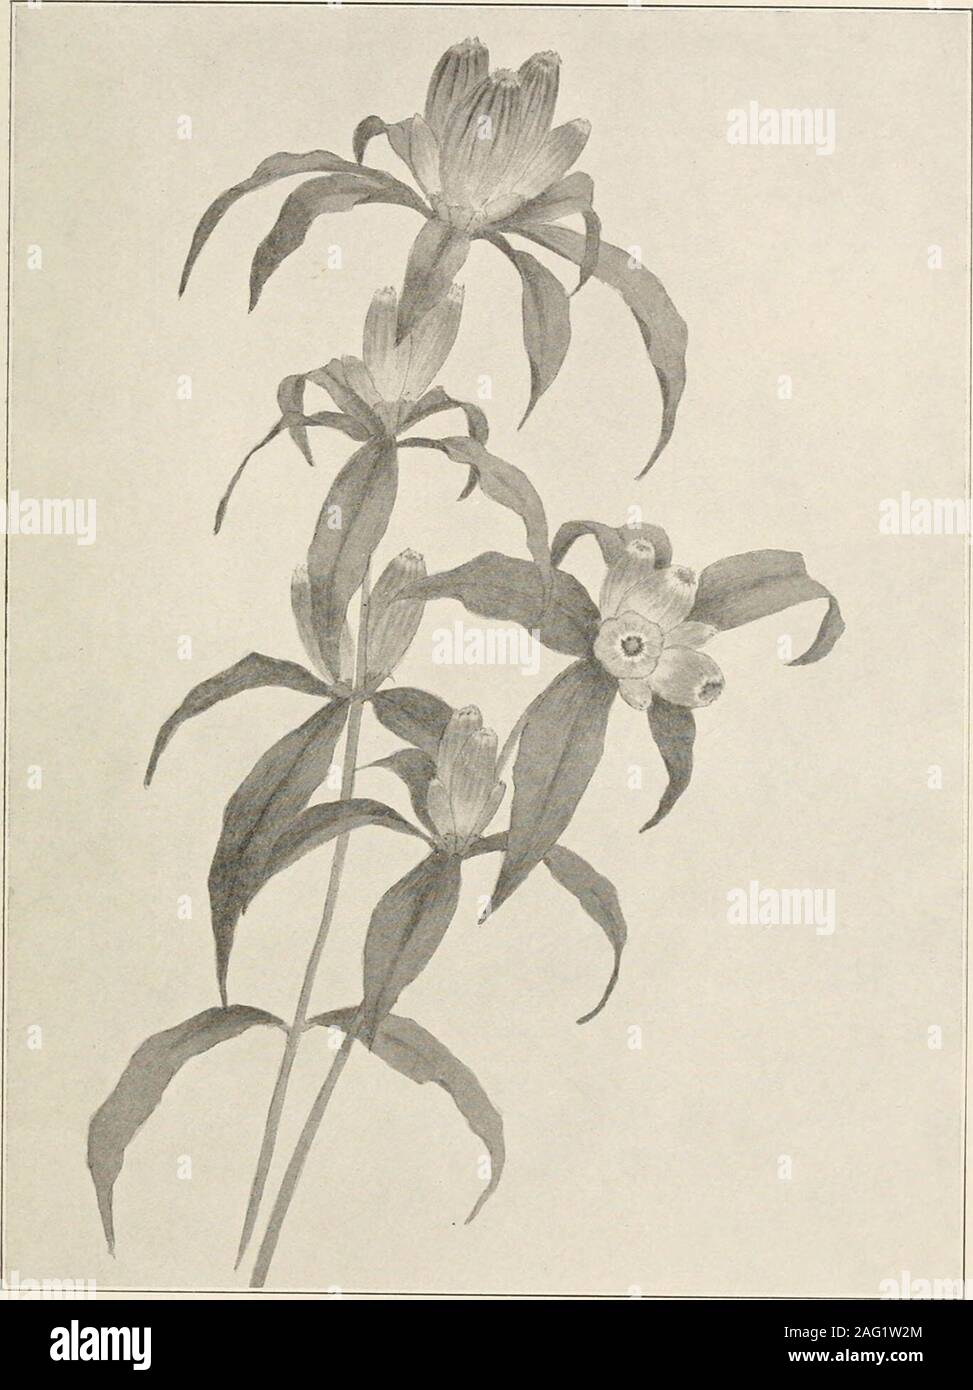 . The plants of southern New Jersey; with especial reference to the flora of the pine barrens and the geographic distribution of the species. From Paijiting Iv II. I.. M- : l. PINE BARREN GENTIAN. Gentiana porphyrio. N. J. Plants. PLATE CV.. From Painting by H. E). Stone. CLOSED GENTIAN. Gentiana andrewsii. N. J. Plants. PLATE CVl. Stock Photo